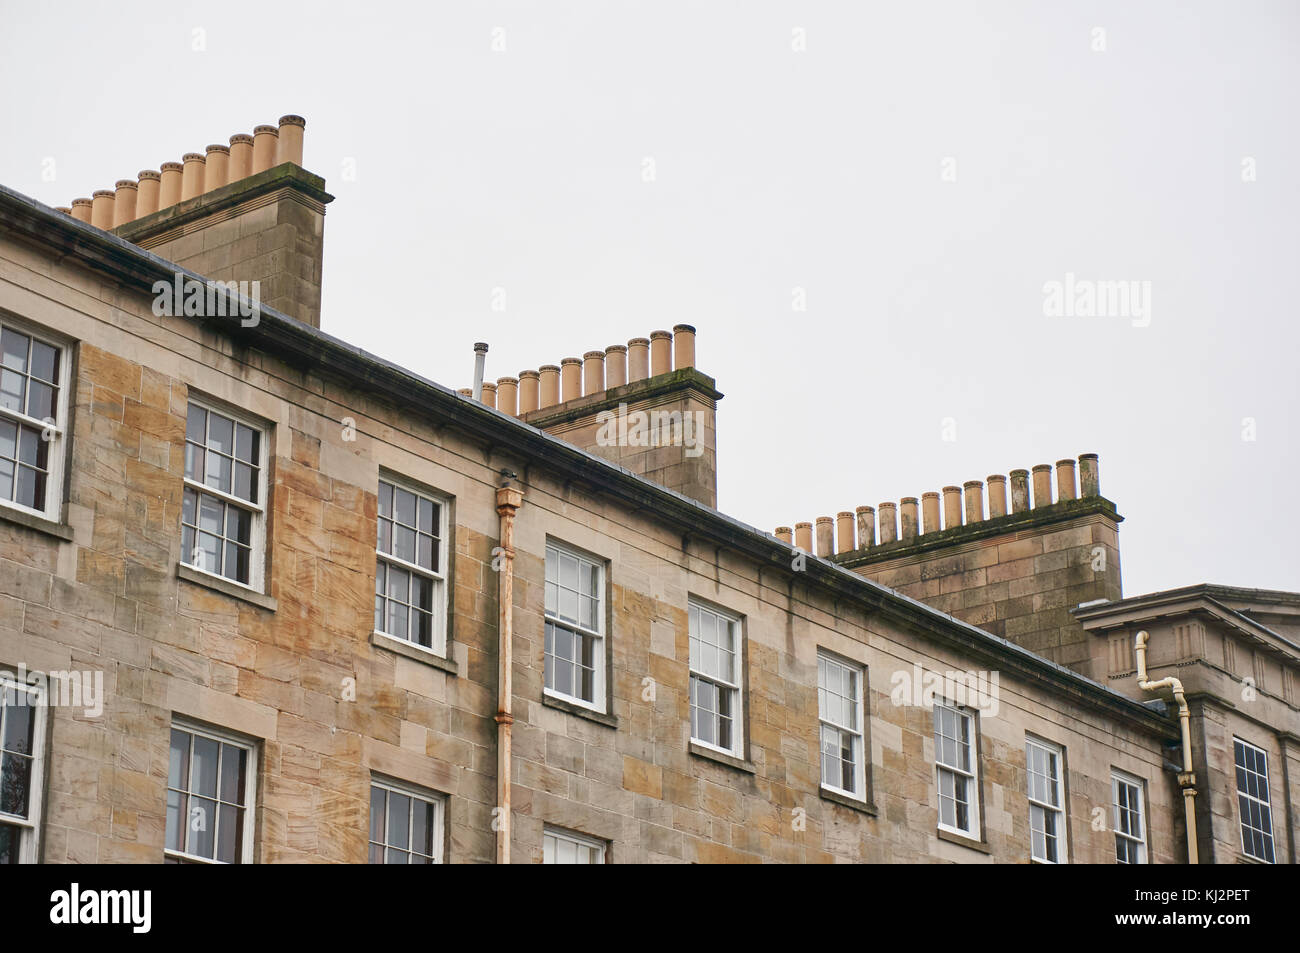 Rows of chimneys on typical sandstone tenement buildings in UK Stock Photo